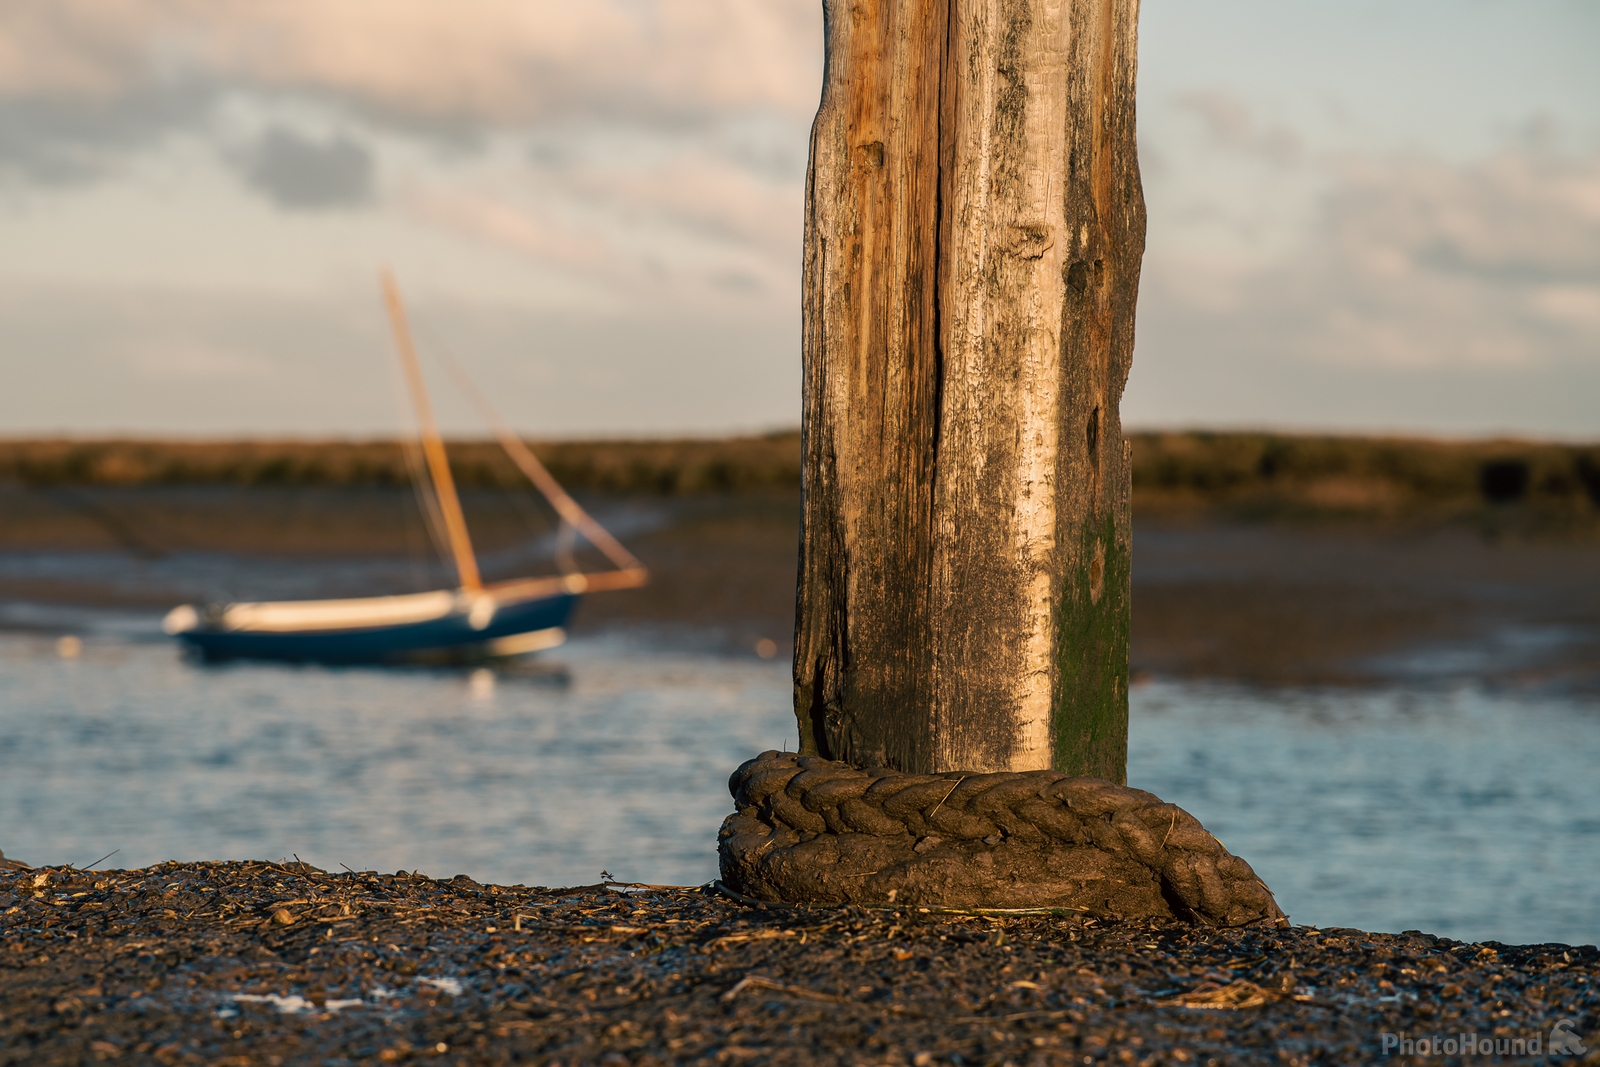 Image of Burnham Overy Staithe by James Billings.